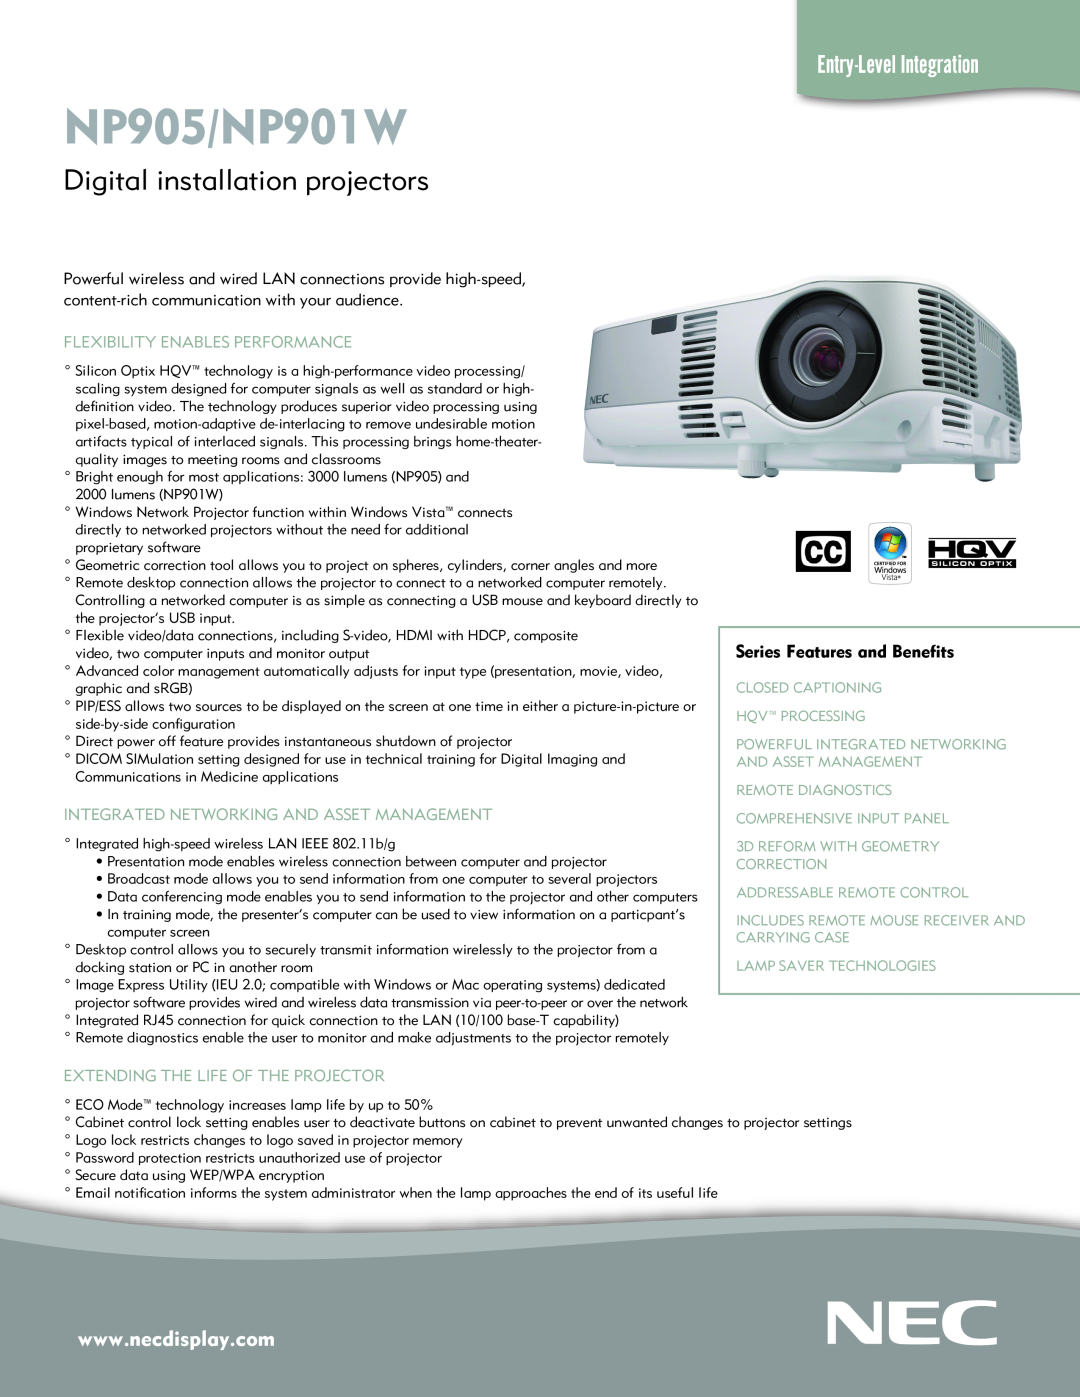 NEC specifications NP905 Installation Guide, NEC Display Solutions of America, Inc, Ceiling Mounted and Desktop 